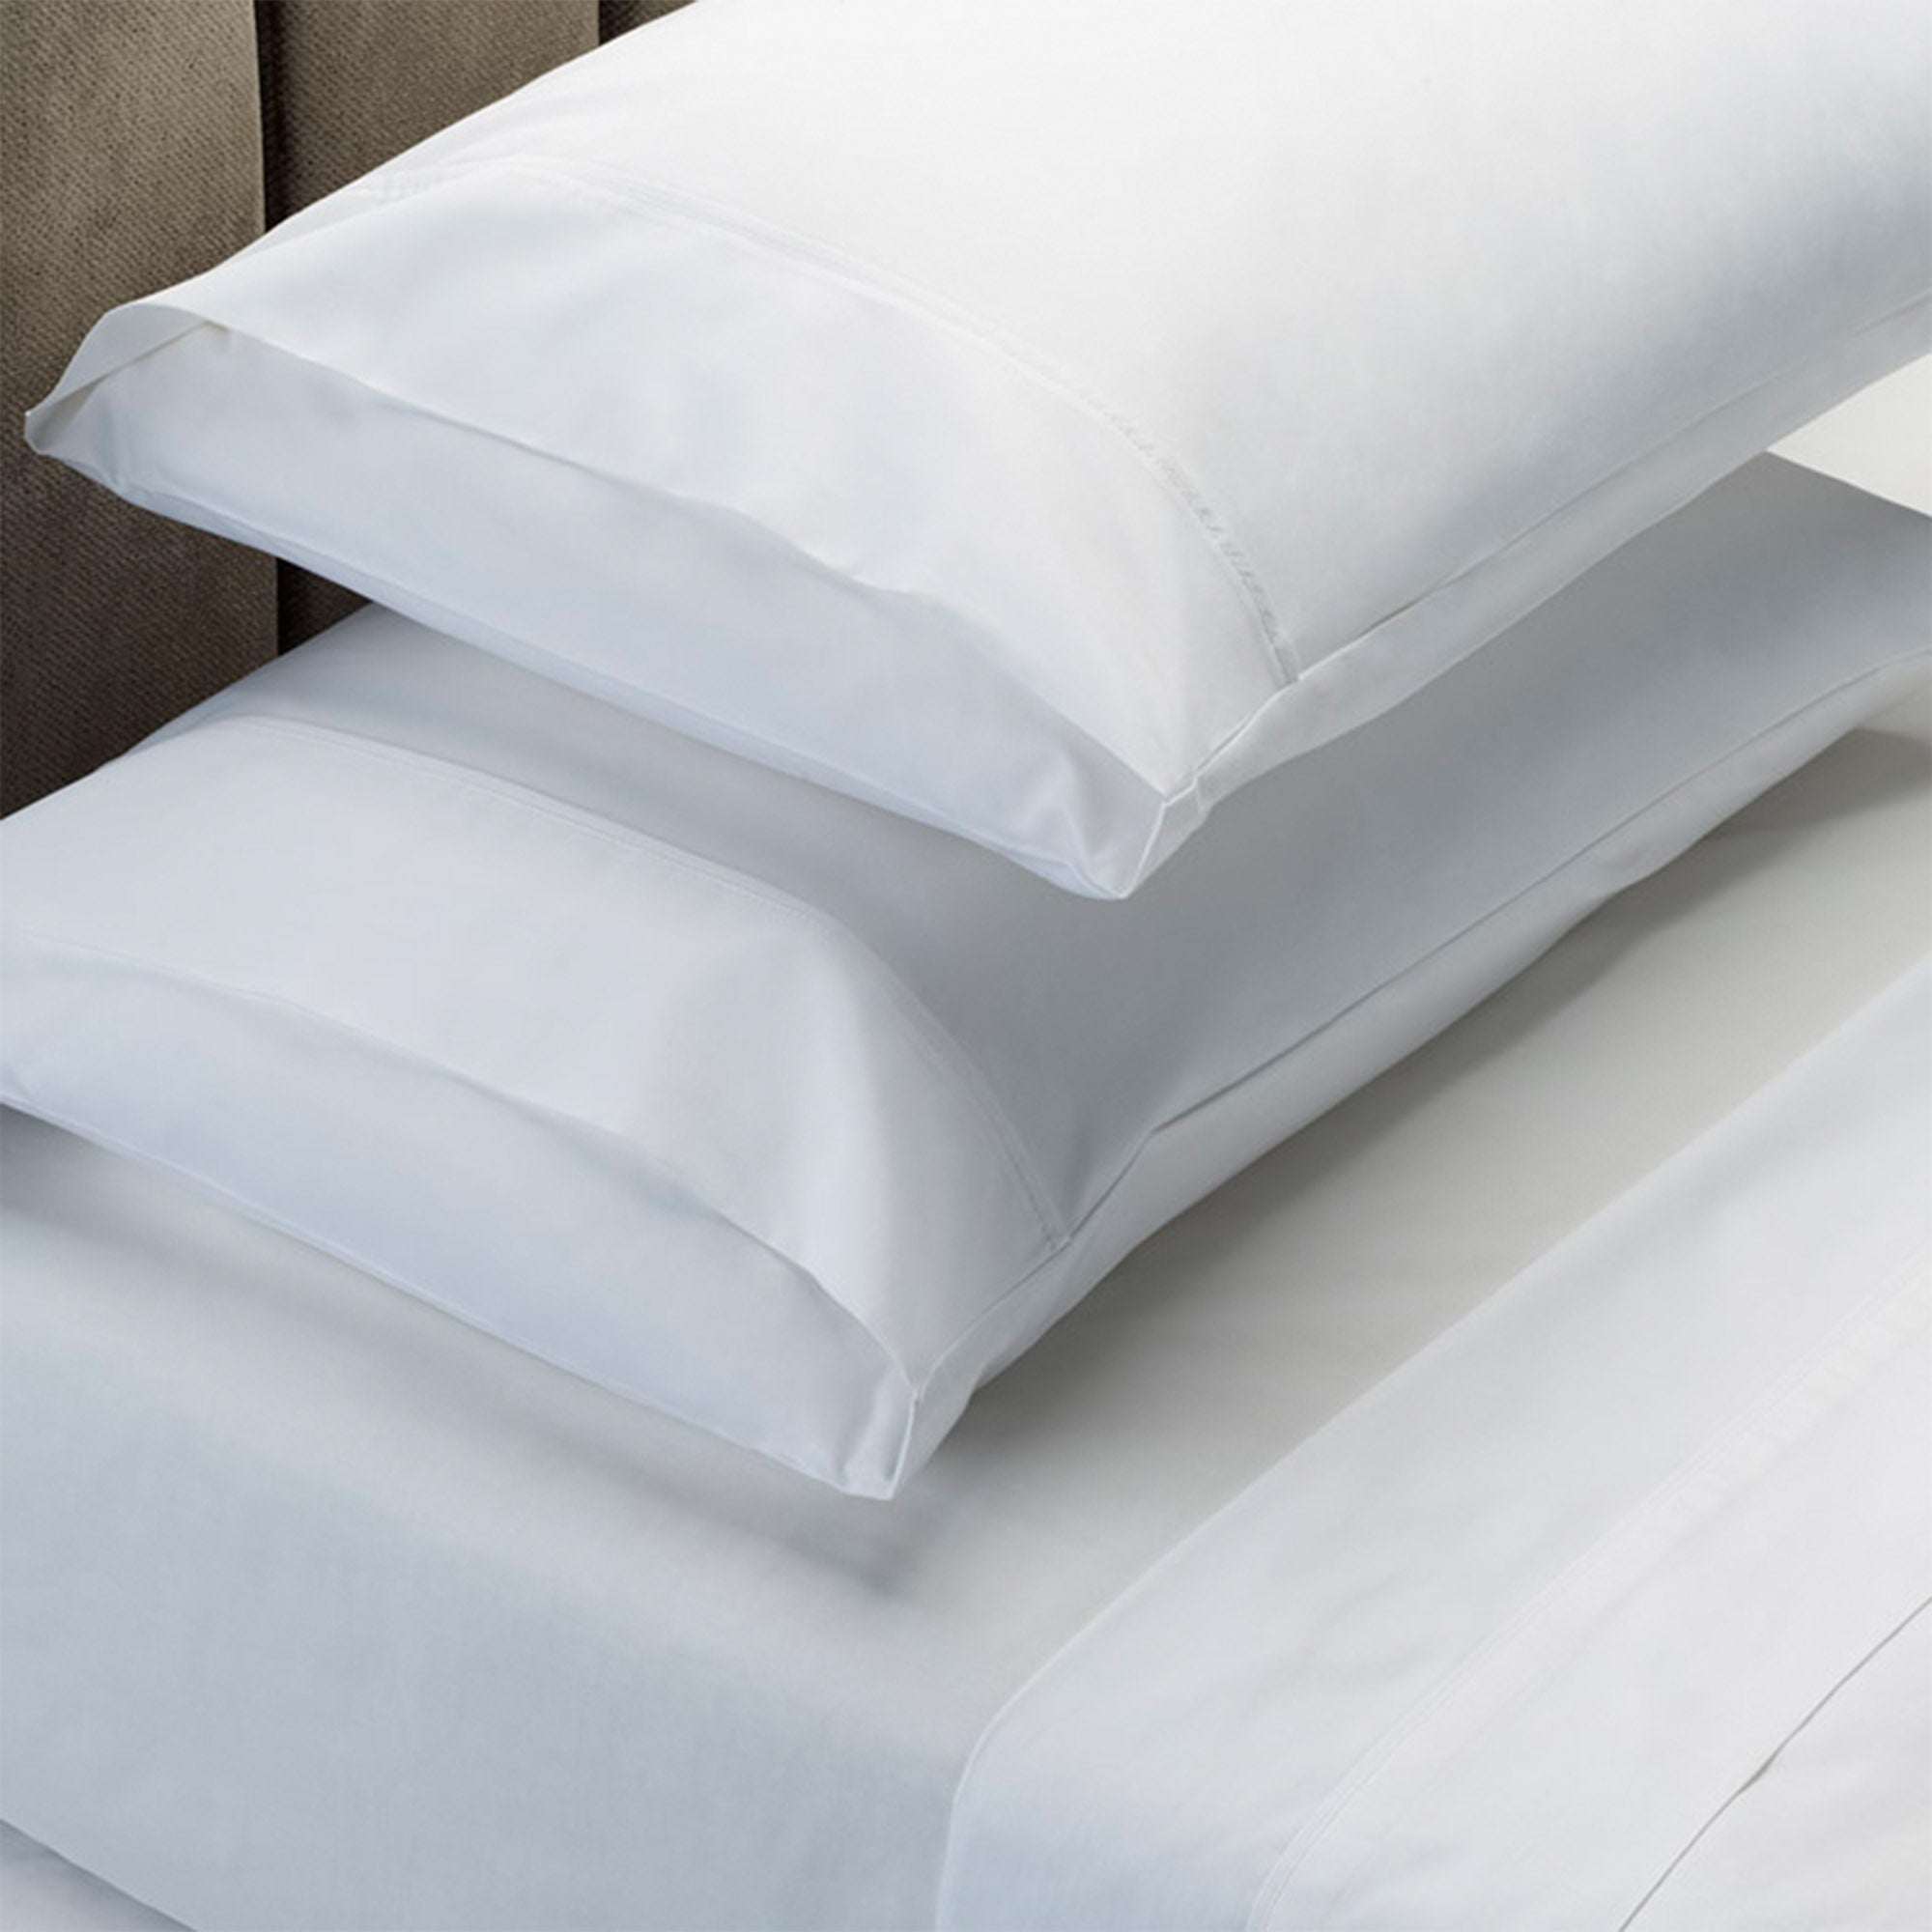 Renee Taylor 1500 Thread Count Pure Soft Cotton Blend Flat & Fitted Sheet Set White Queen